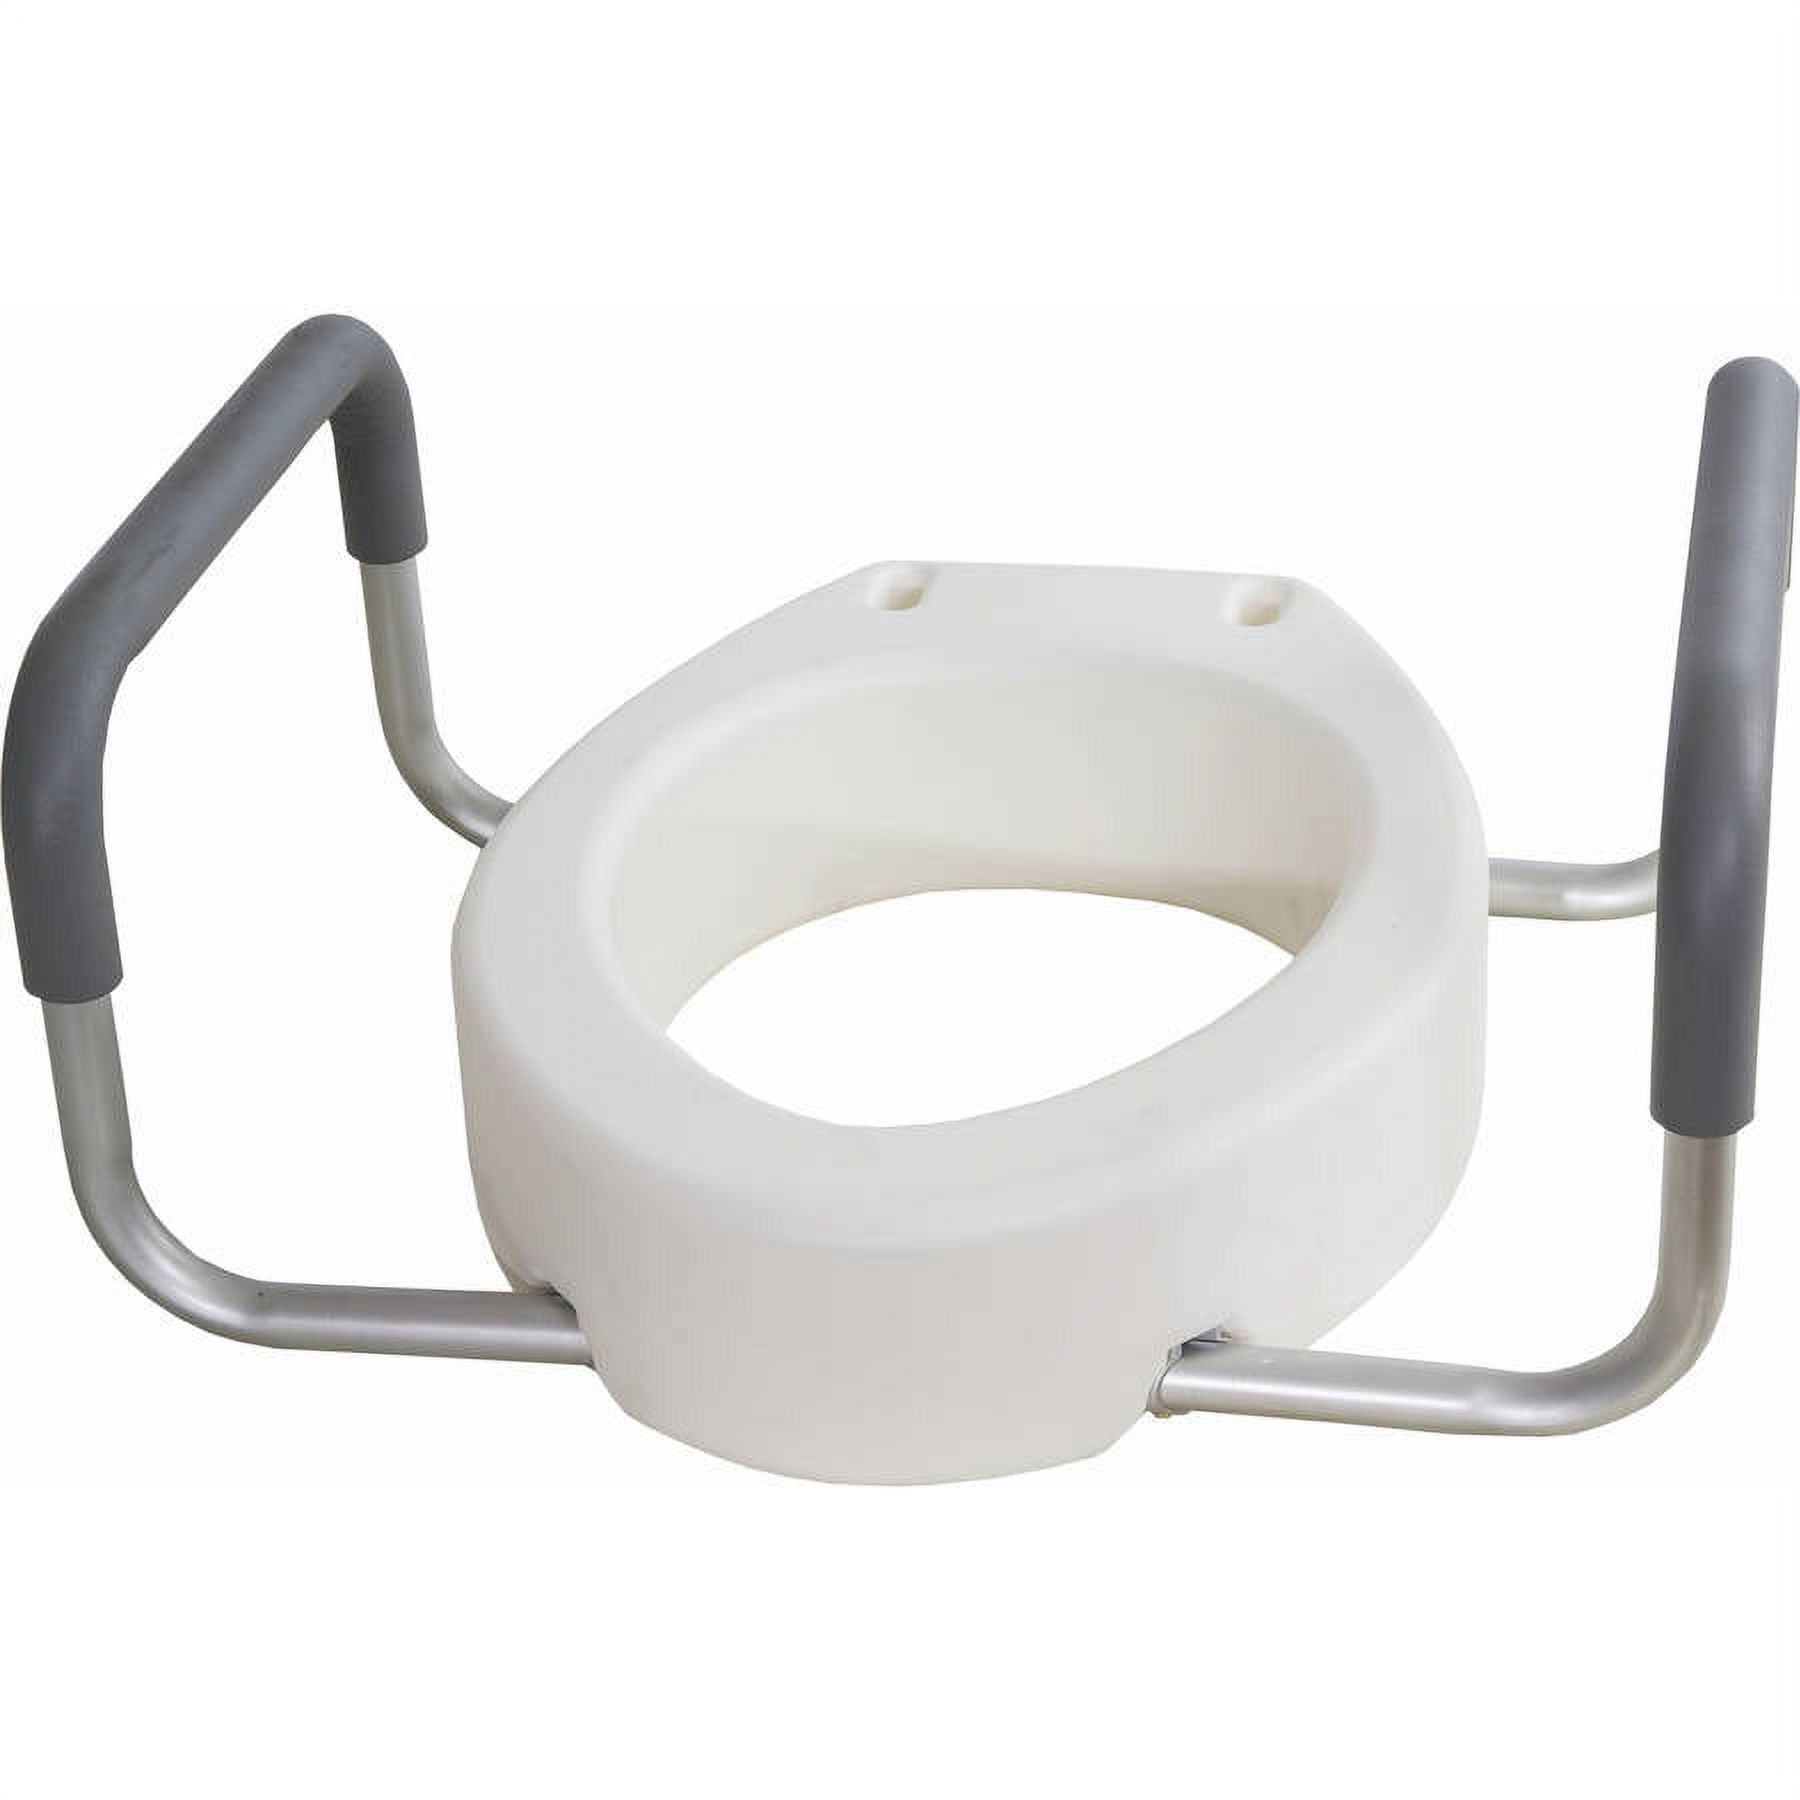 Essential Medical Supply Raised Elevated Toilet Seat Riser for a Standard Round Bowl with Padded Aluminum Arms for Support and Compatible with Existing Seat - image 1 of 8